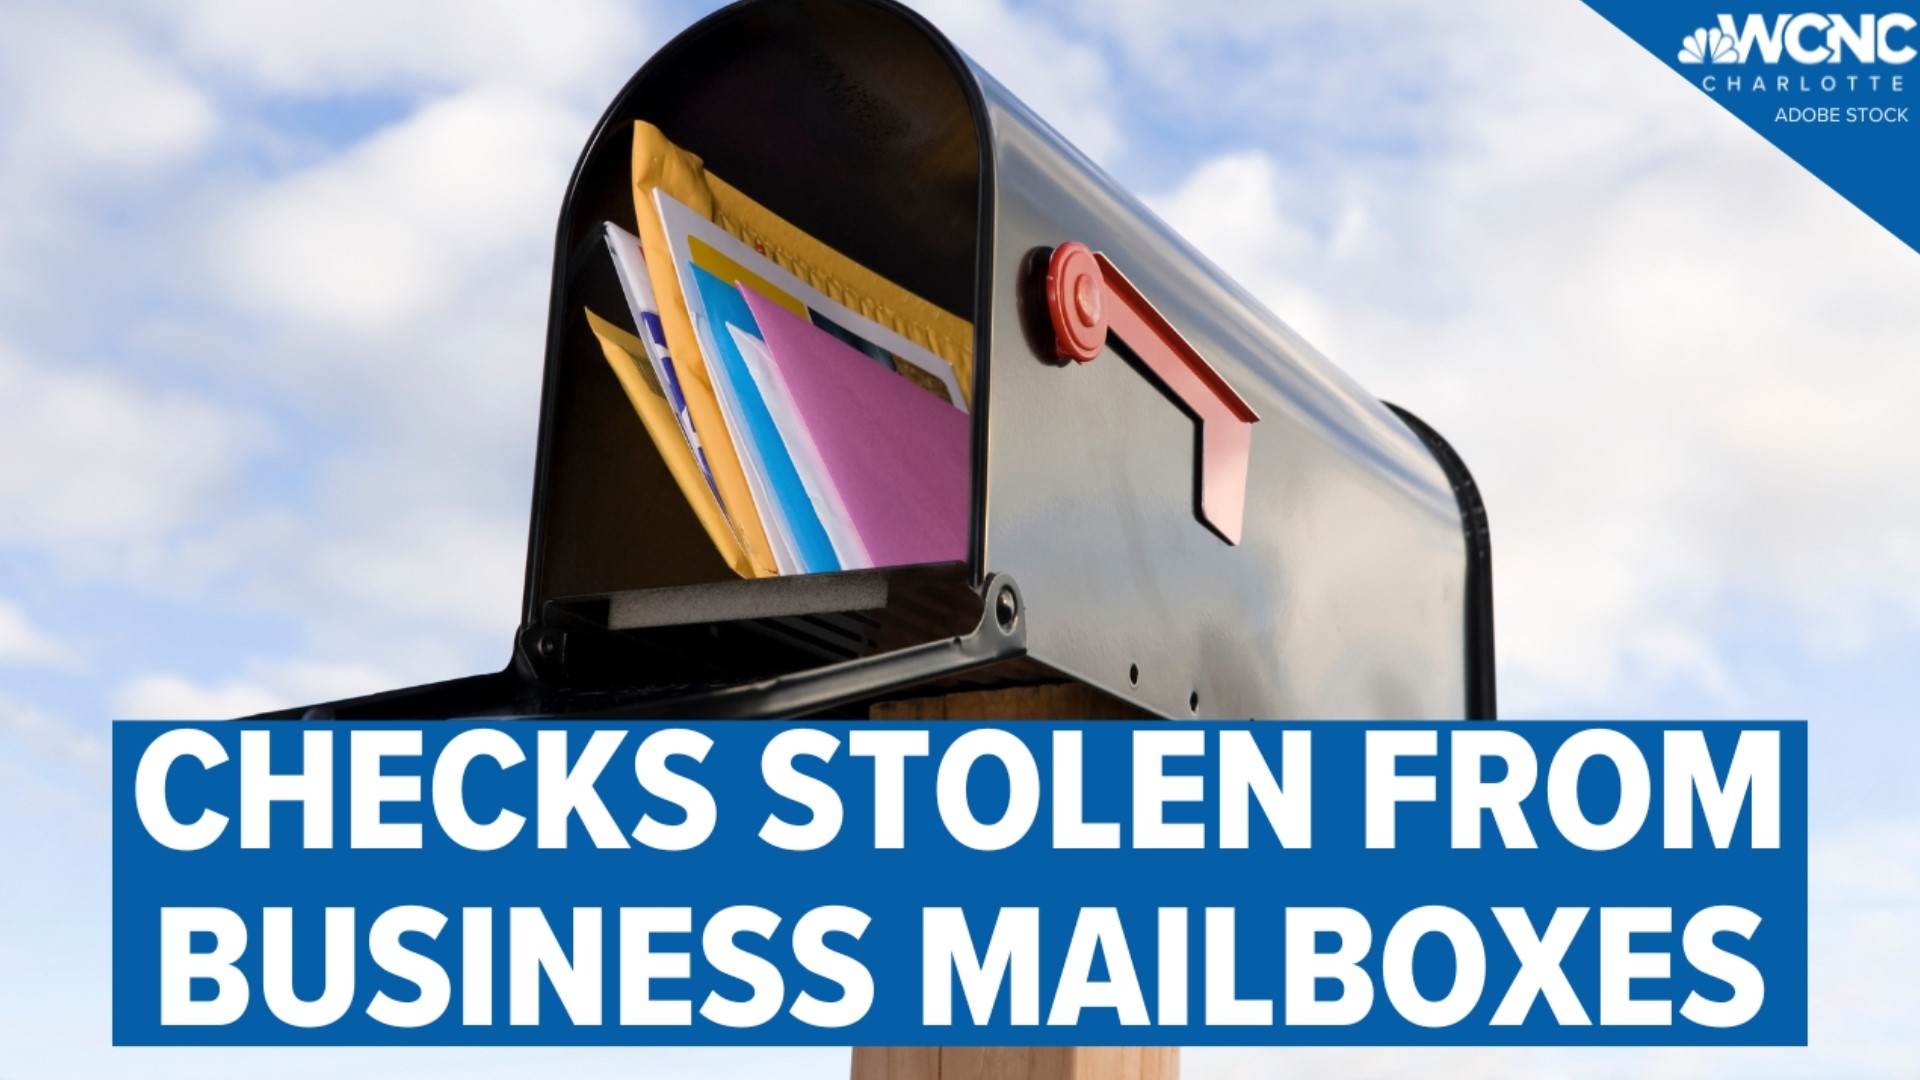 Business owners beware. The Matthews Police Department said there has been a recent pattern of thieves targeting mail at commercial businesses.